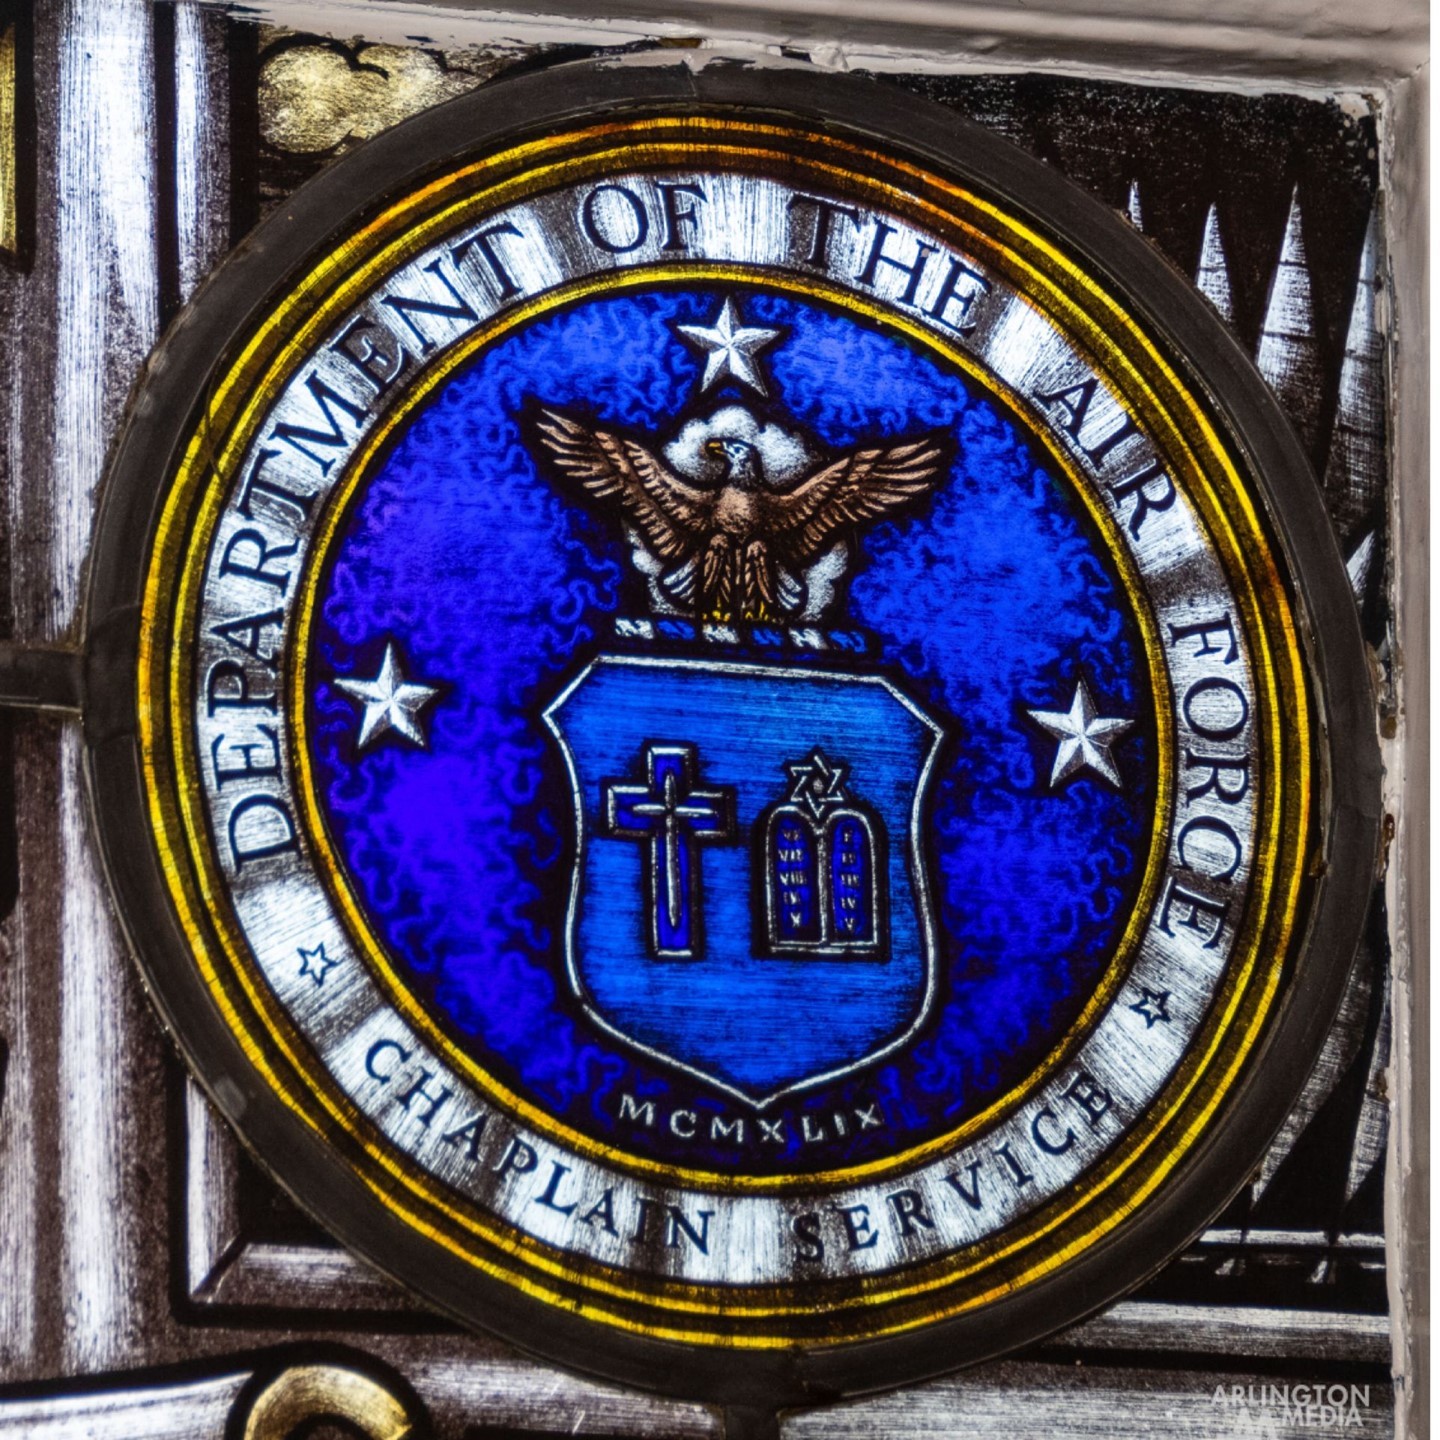 The stained glass windows on the south side of the Old Post Chapel honor the branches of the armed forces and include scenes from the Old Testament.  A small plaque is placed below each window with an inscription naming the organization that donated the window and the branch of military service being honored.

The Army Service window portrays Joshua at the battle of Jericho.  The plaque reads, “This window is donated by the members of the Class of 1940, United States Military Academy, in tribute to all those now and in the future who have or will have served their country in the United States Army.”

The Marine Corps Service window shows Gideon and his army.  The plaque reads, “This window is donated by the United States Marine Corps and dedicated to the memory of all Marines who have died since the founding of the Corps on 19 November 1775.”

The Navy Service window depicts Solomon at the building of the Temple at Jerusalem.  The plaque reads, “This window is donated by the members of the United States Naval Academy Class of 1940 in tribute to all who have served in the United States Navy.”

The Air Force Service window illustrates the prophet Isaiah and the quotation, “they shall rise up with wings as an eagle.” The plaque reads, “This window was contributed by the chapel congregations of the Air Force, Protestant, Catholic and Jewish, in memory of all airmen, male and female, officer and enlisted, who gave their lives in the service of their country.”

The Coast Guard Service window portrays Noah’s Ark.  The plaque reads, “This window is donated by the United States Coast Guard Academy Alumni Association in memory of all those who willingly, bravely and faithfully served their country and perpetuated the proud traditions of our Nation’s smallest Armed Force.”

The stained glass windows on the north side of the chapel were donated by service Chiefs of Chaplains.